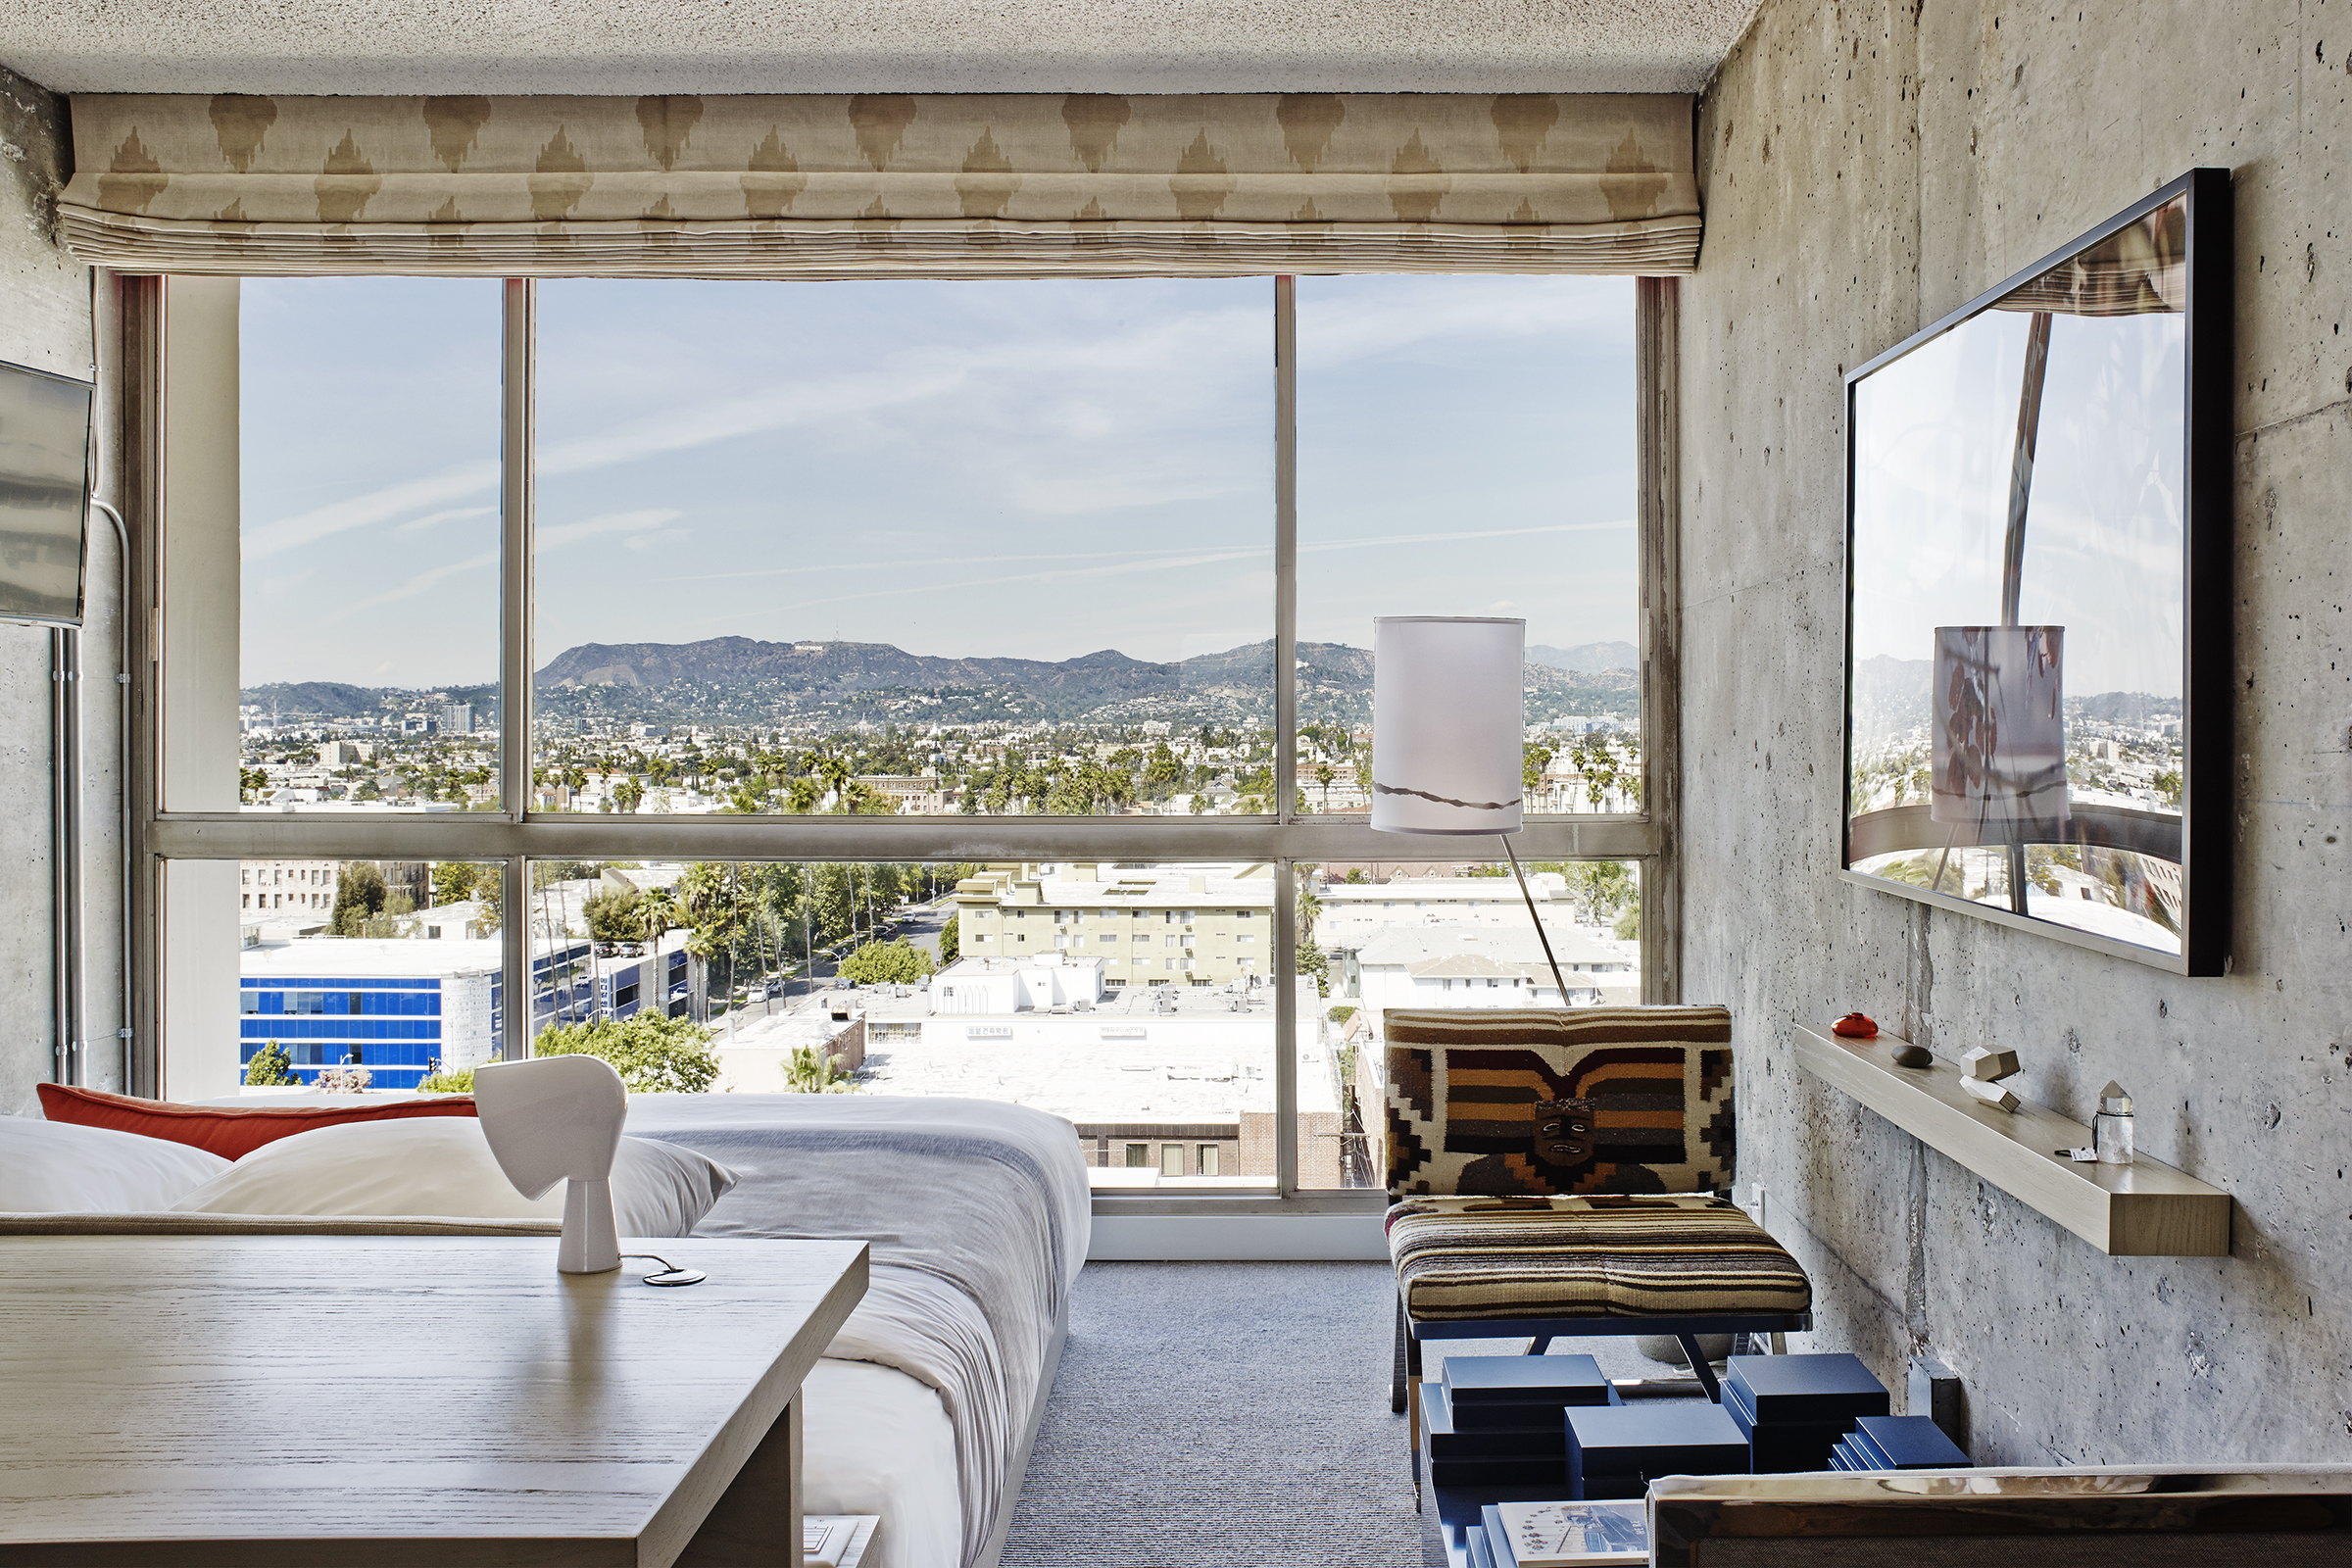 A room with a floor to ceiling window looks out on a cityscape scattered with palm trees and mountains in the distance